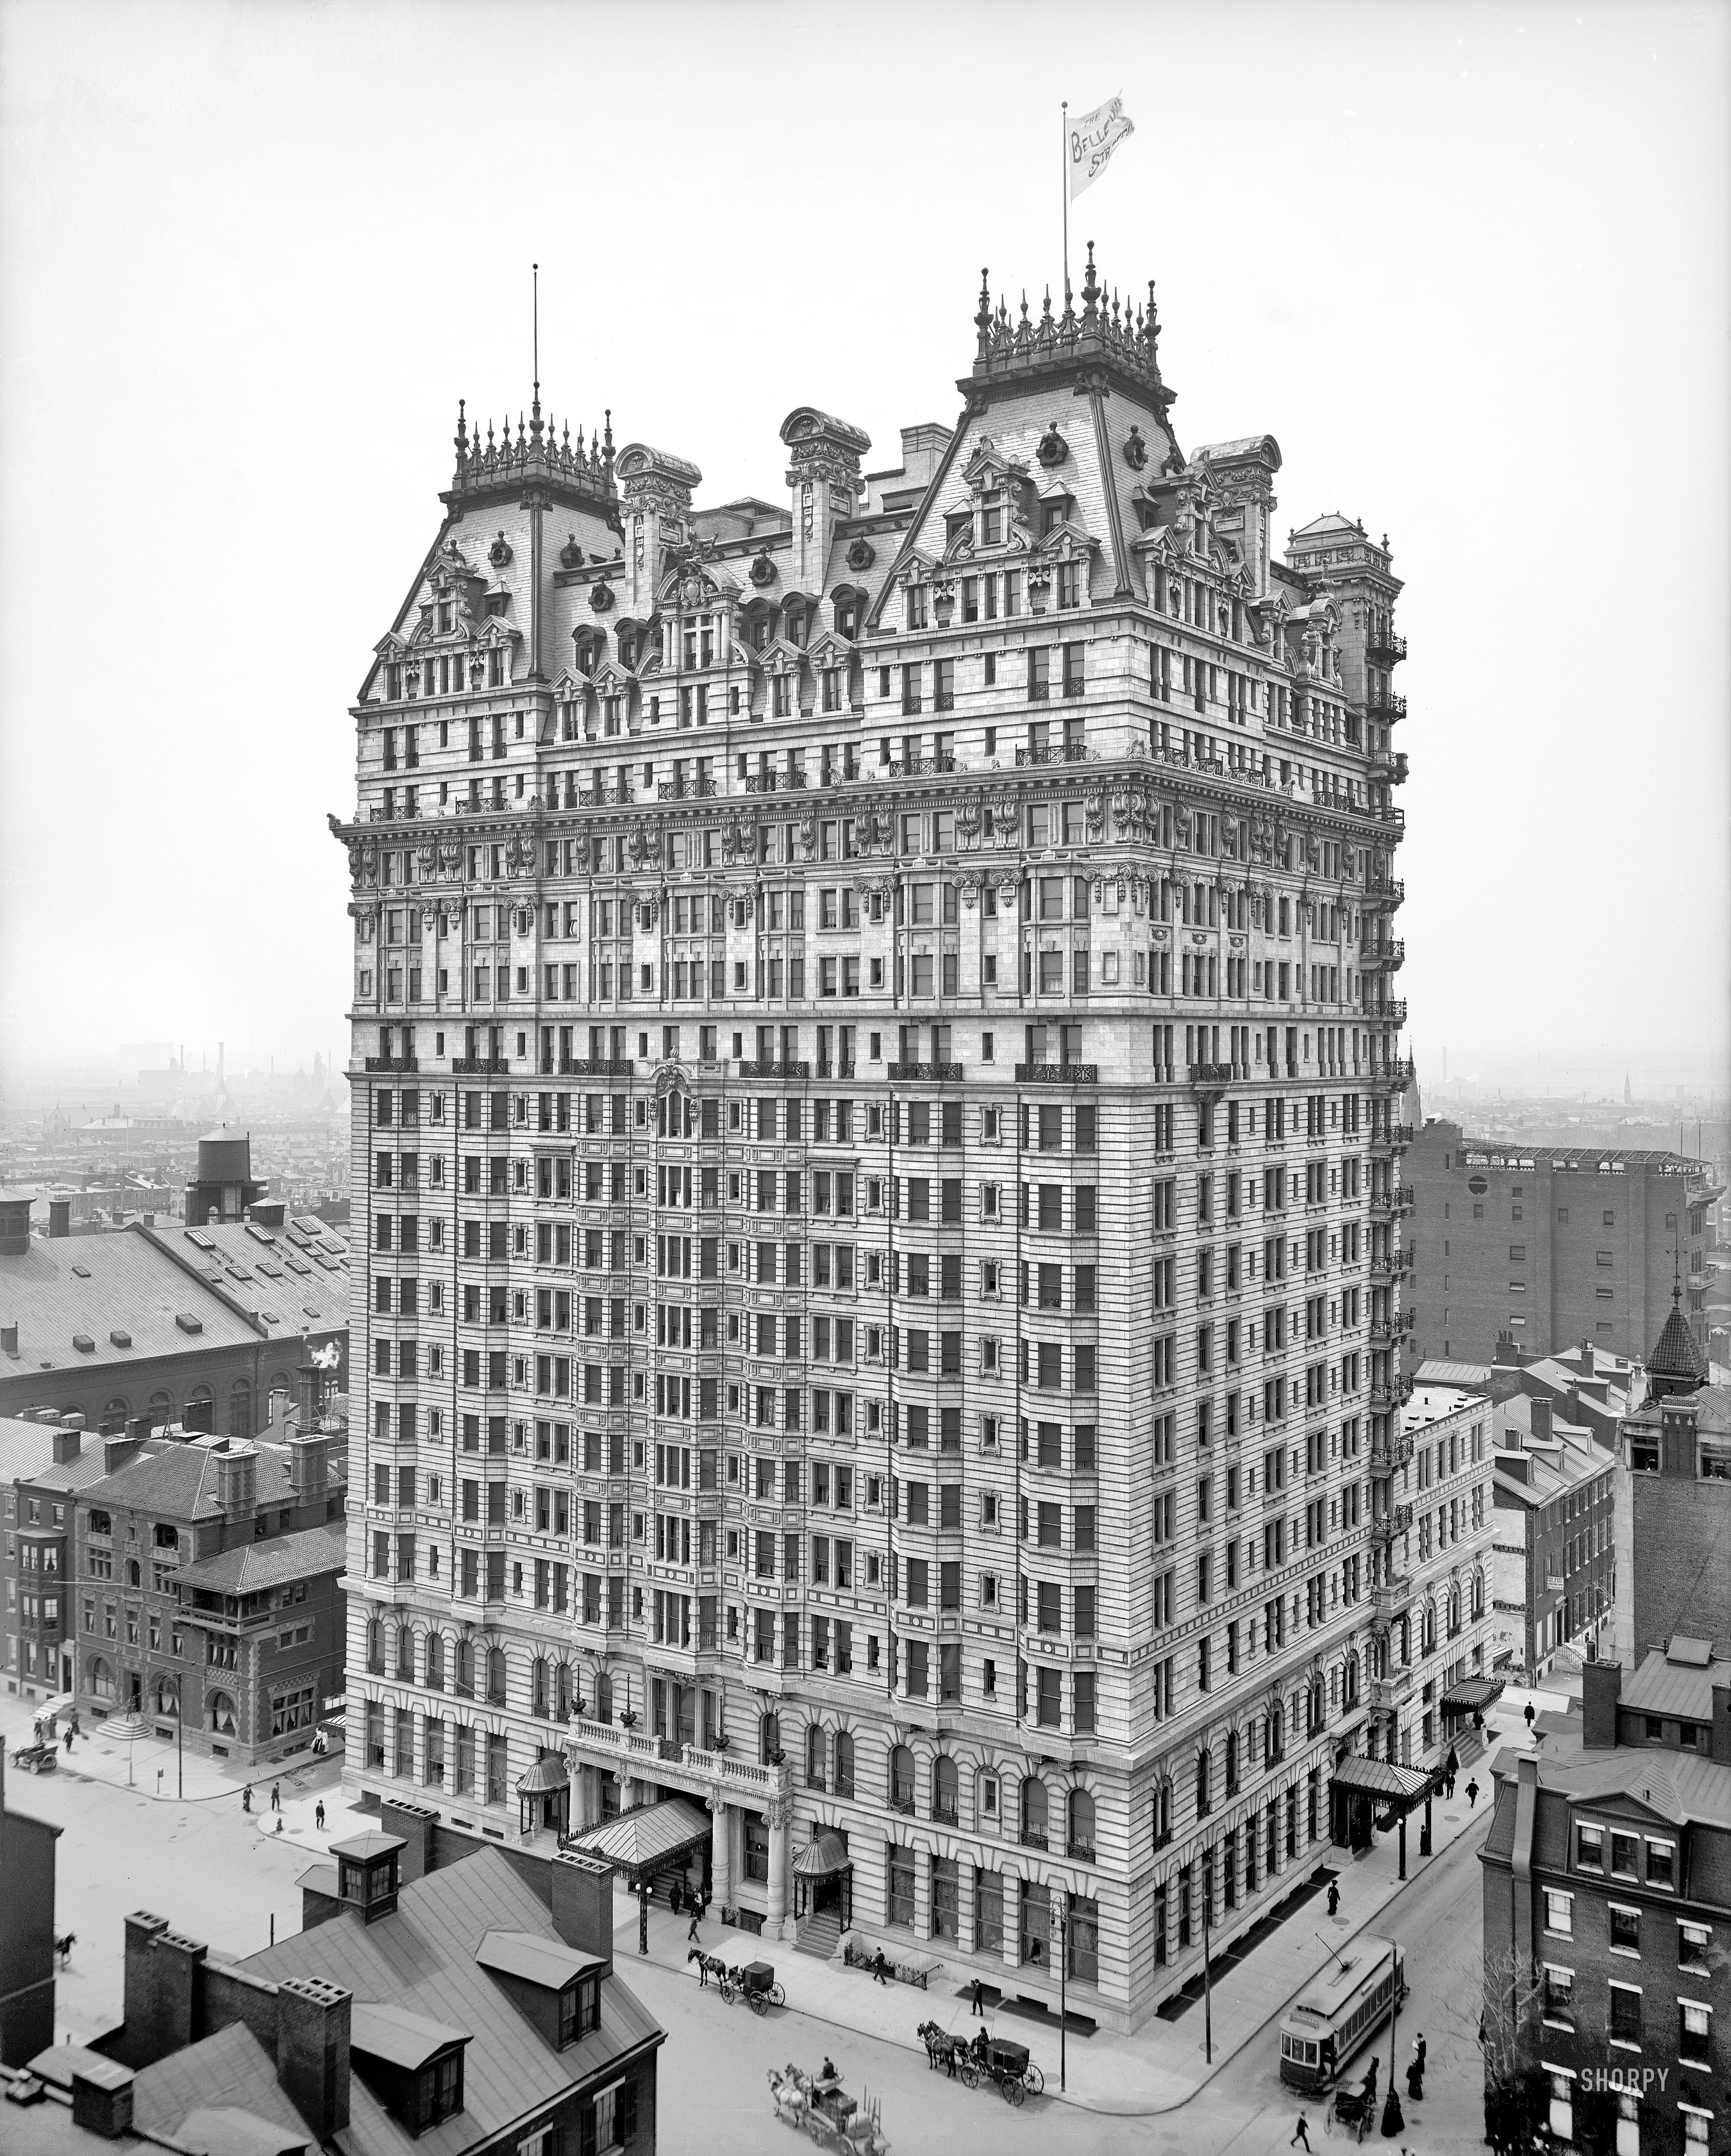 Philadelphia circa 1905. "The Bellevue-Stratford Hotel." As is often the case in these architectural views, the most interesting bits are at the periphery. 8x10 inch dry plate glass negative, Detroit Publishing Company. View full size.